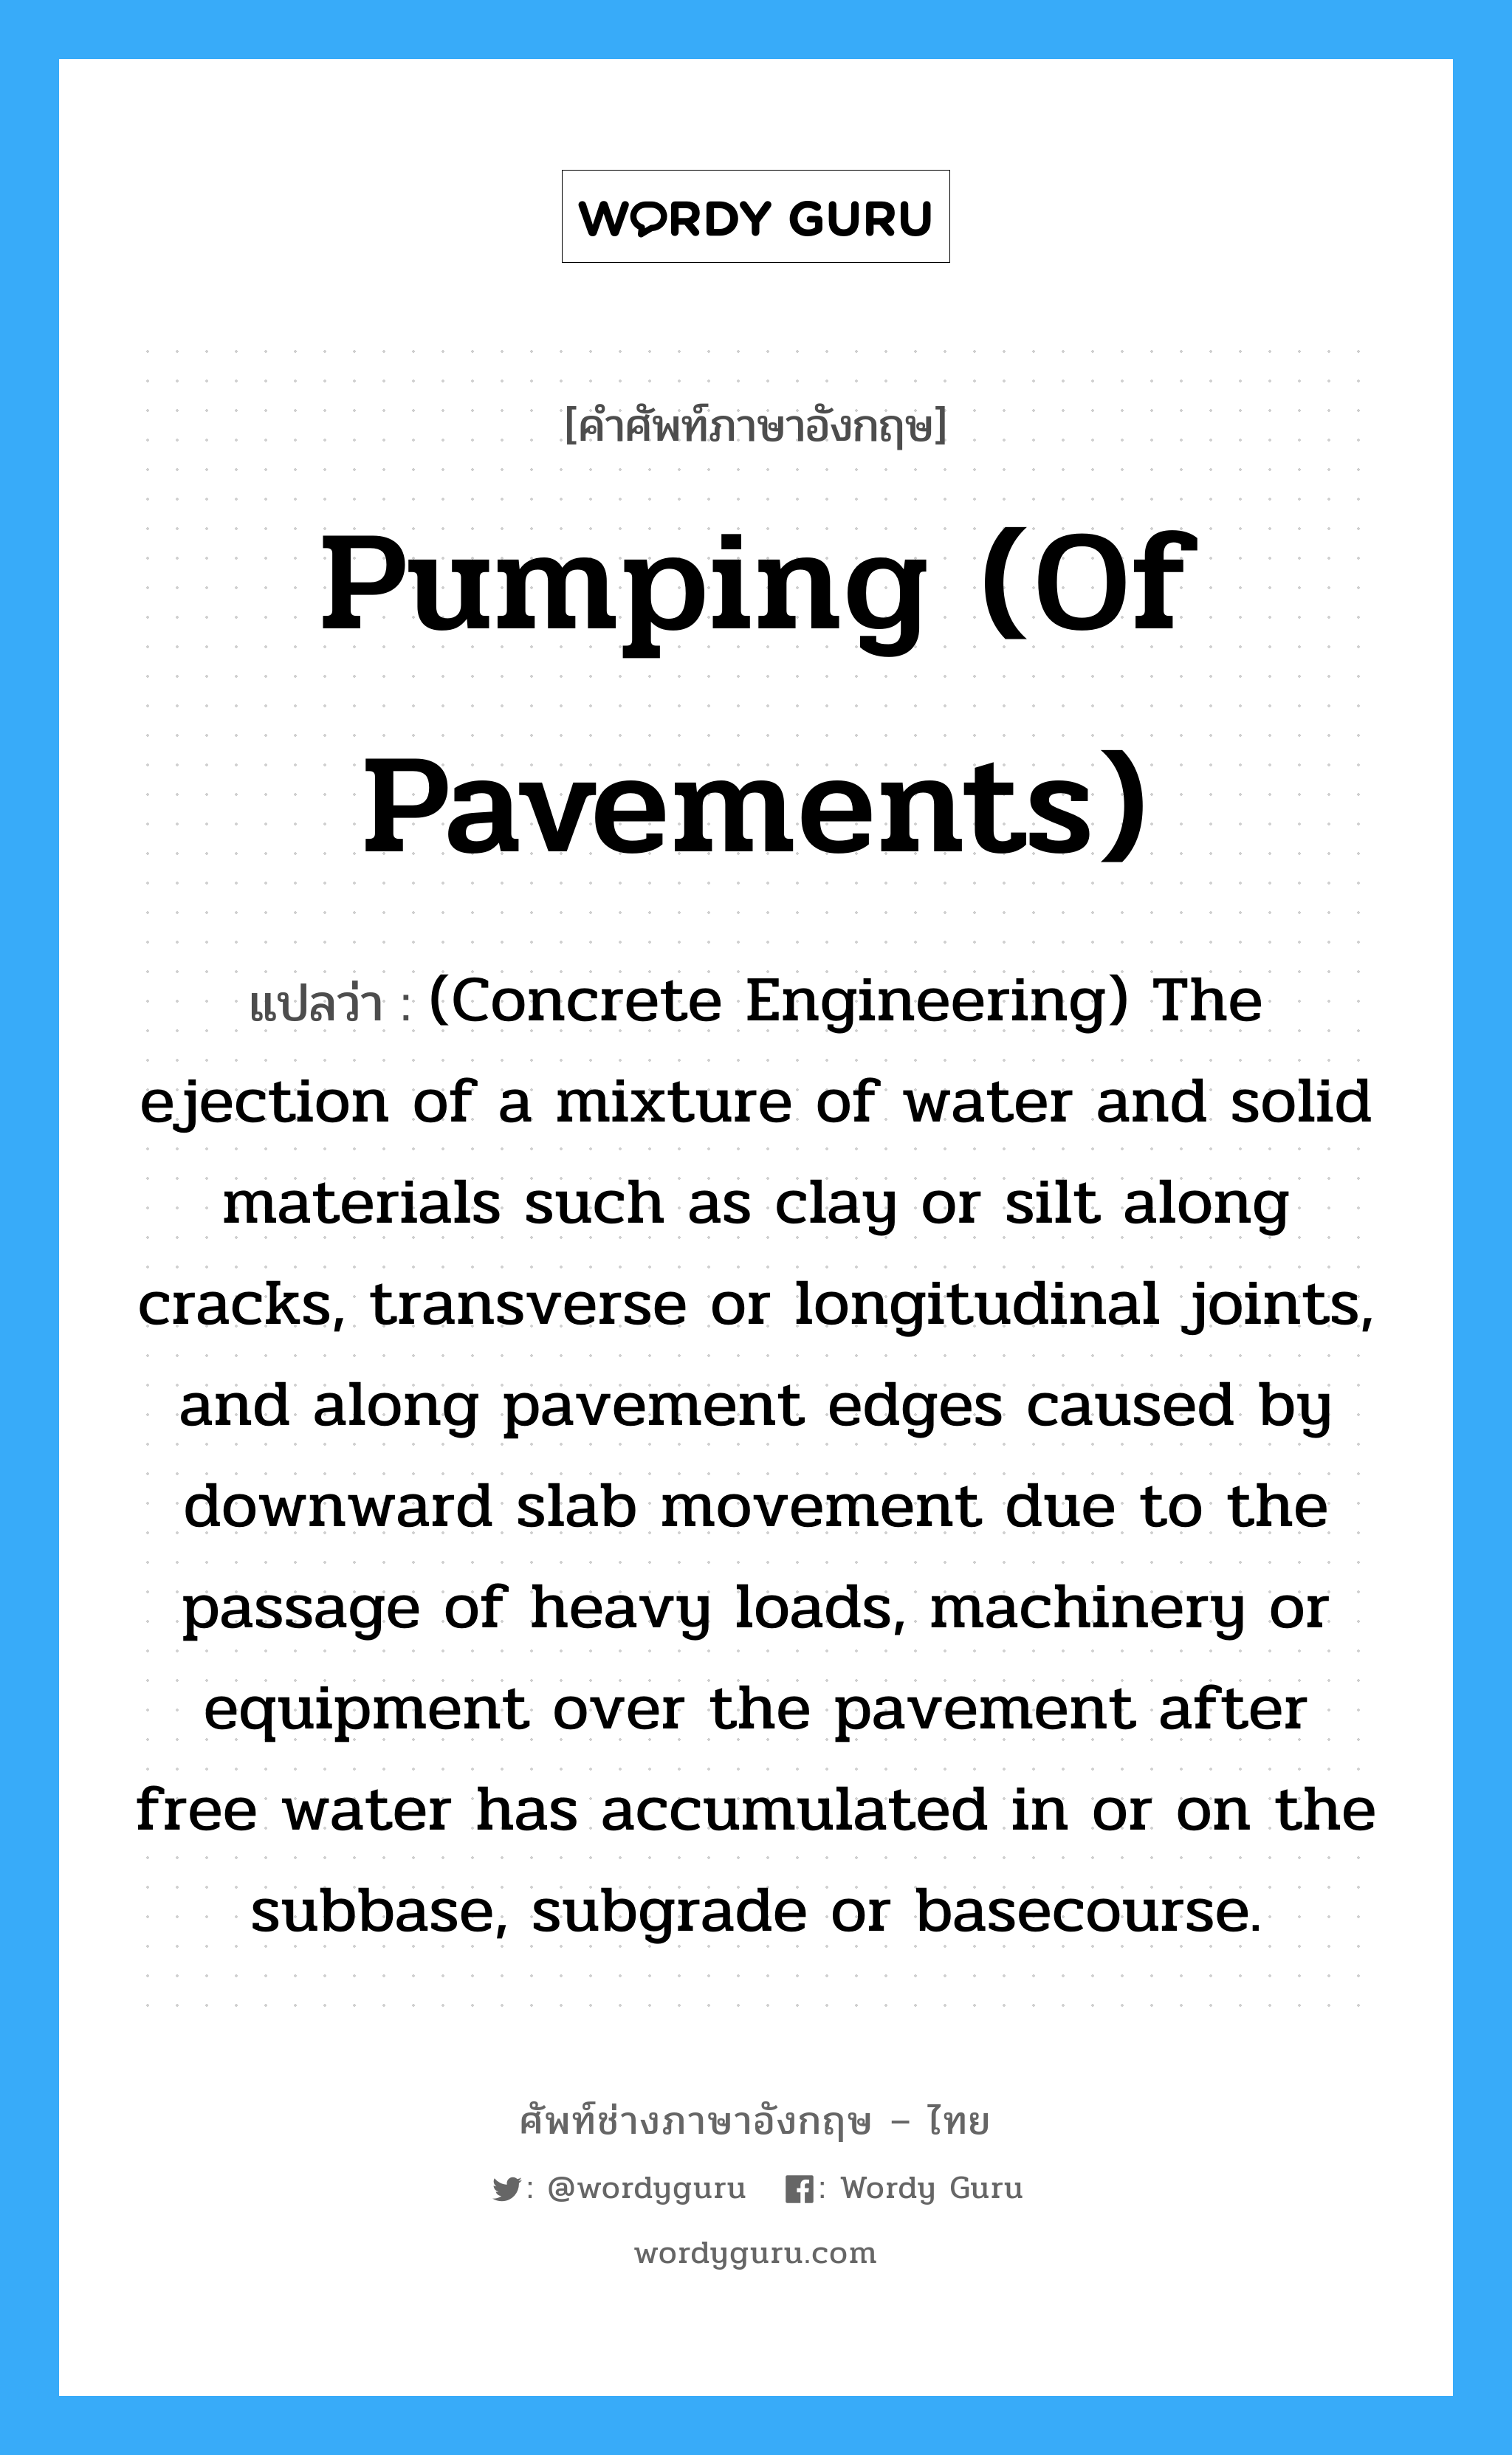 (Concrete Engineering) The ejection of a mixture of water and solid materials such as clay or silt along cracks, transverse or longitudinal joints, and along pavement edges caused by downward slab movement due to the passage of heavy loads, machinery or equipment over the pavement after free water has accumulated in or on the subbase, subgrade or basecourse. ภาษาอังกฤษ?, คำศัพท์ช่างภาษาอังกฤษ - ไทย (Concrete Engineering) The ejection of a mixture of water and solid materials such as clay or silt along cracks, transverse or longitudinal joints, and along pavement edges caused by downward slab movement due to the passage of heavy loads, machinery or equipment over the pavement after free water has accumulated in or on the subbase, subgrade or basecourse. คำศัพท์ภาษาอังกฤษ (Concrete Engineering) The ejection of a mixture of water and solid materials such as clay or silt along cracks, transverse or longitudinal joints, and along pavement edges caused by downward slab movement due to the passage of heavy loads, machinery or equipment over the pavement after free water has accumulated in or on the subbase, subgrade or basecourse. แปลว่า Pumping (of Pavements)